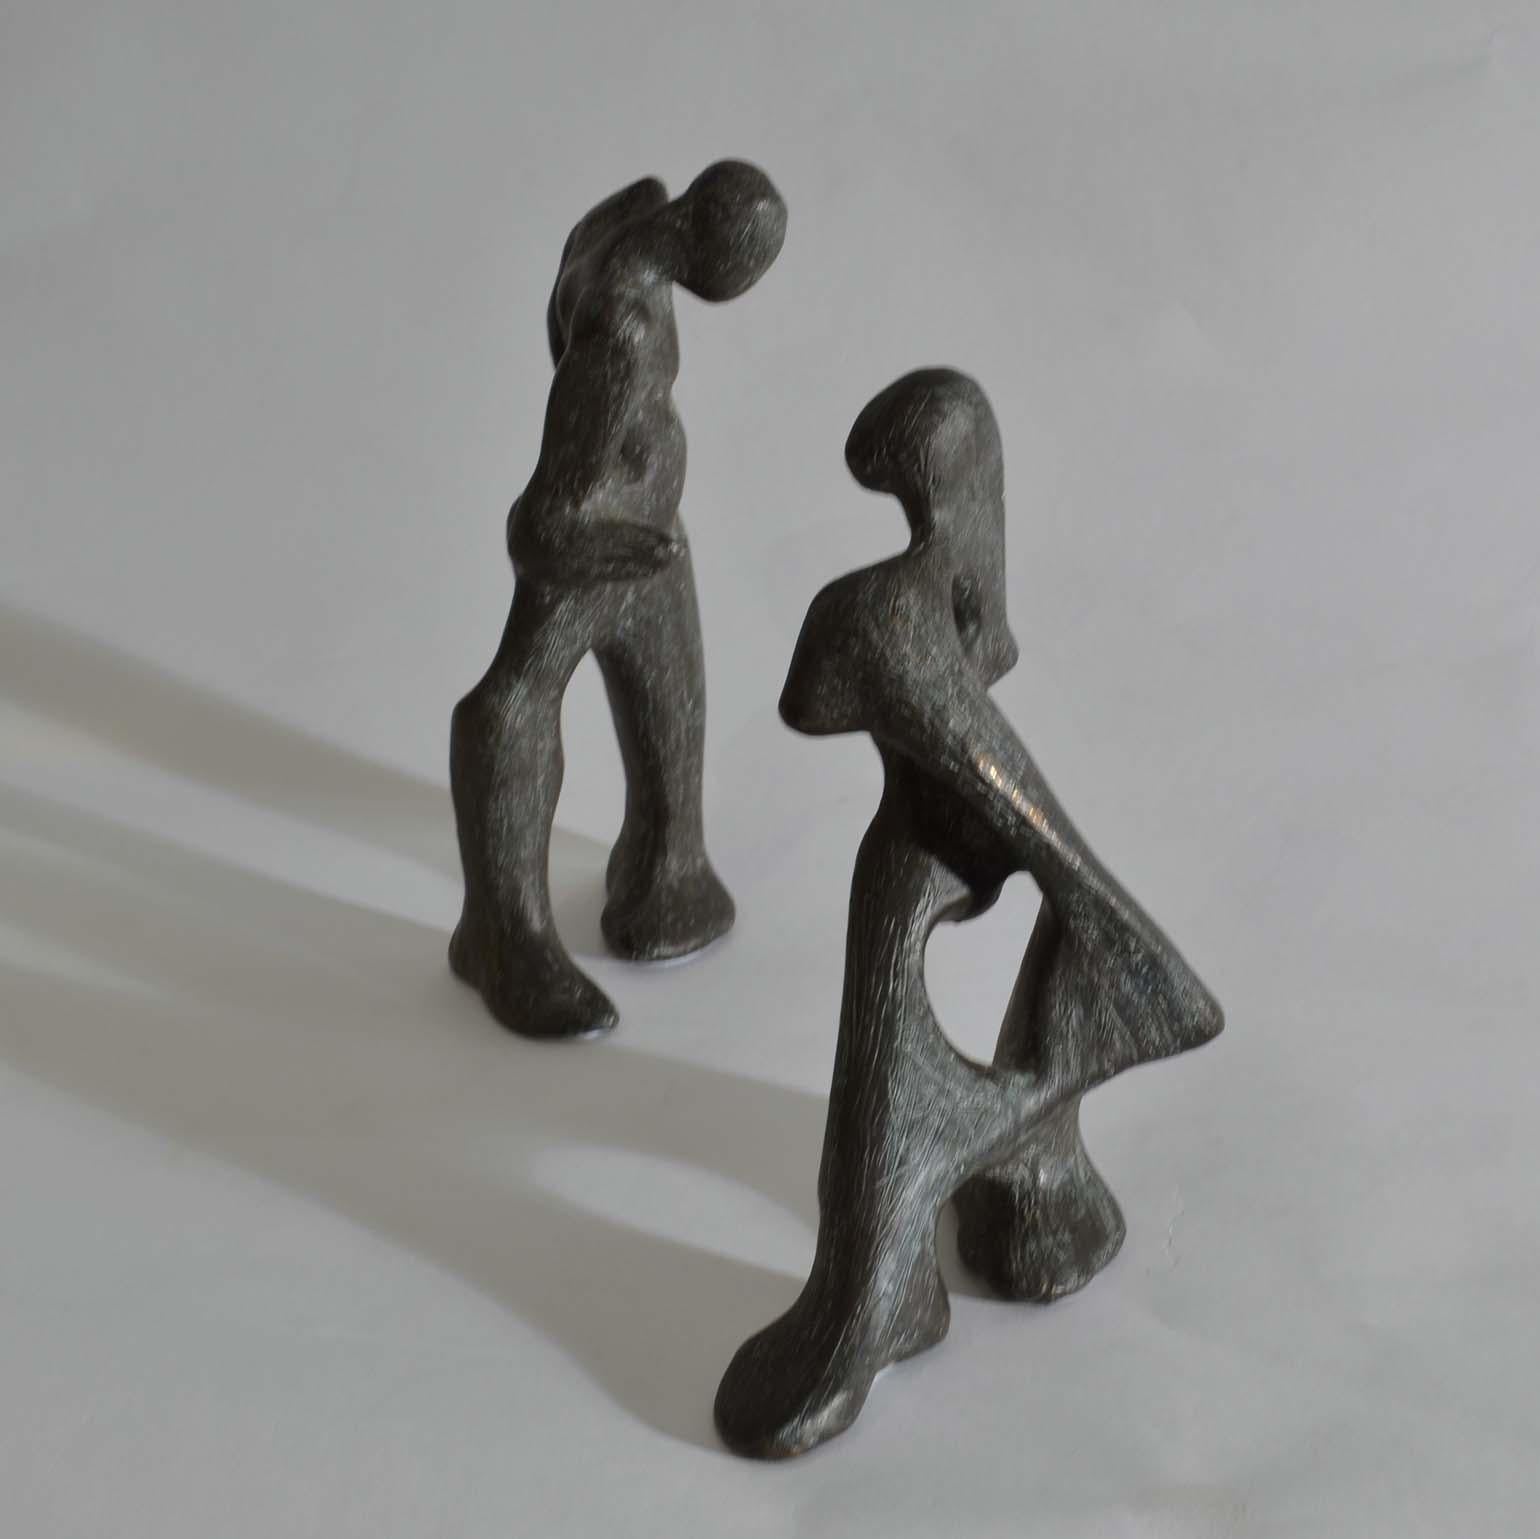 Dynamic and playful sculptures of dancing pair. They are free standing male and female figures cast in bronze with a scratched textured patina. The biomorphic figures can be positioned in any formation, reacting differently to each others stance as